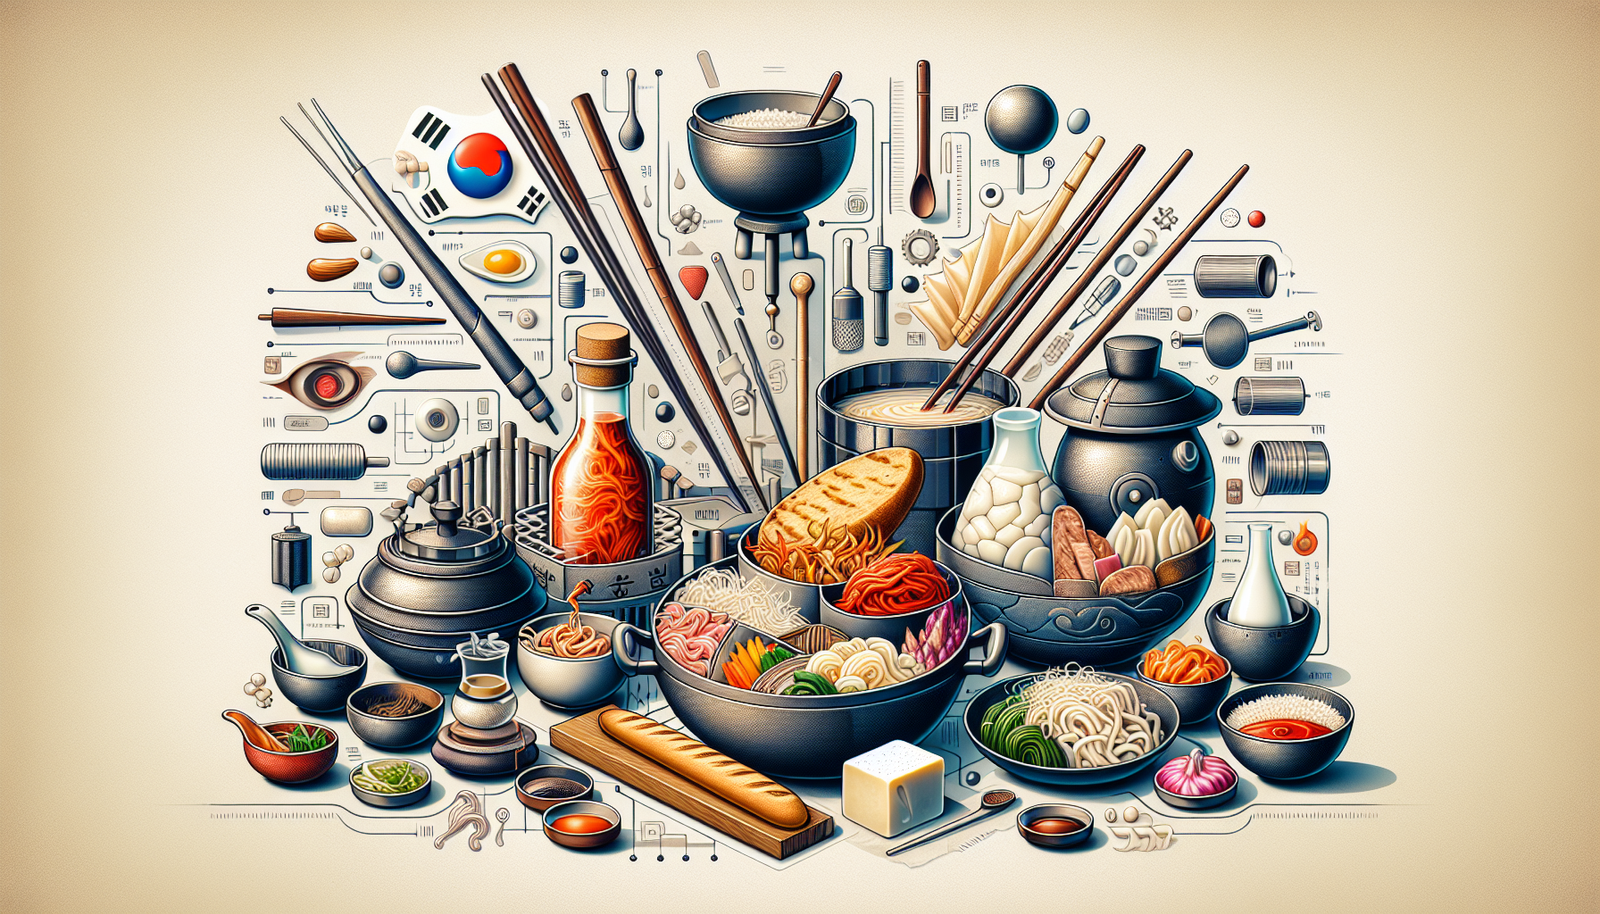 What Are The Cultural And Historical Influences On Modern Korean Fusion Cuisine?